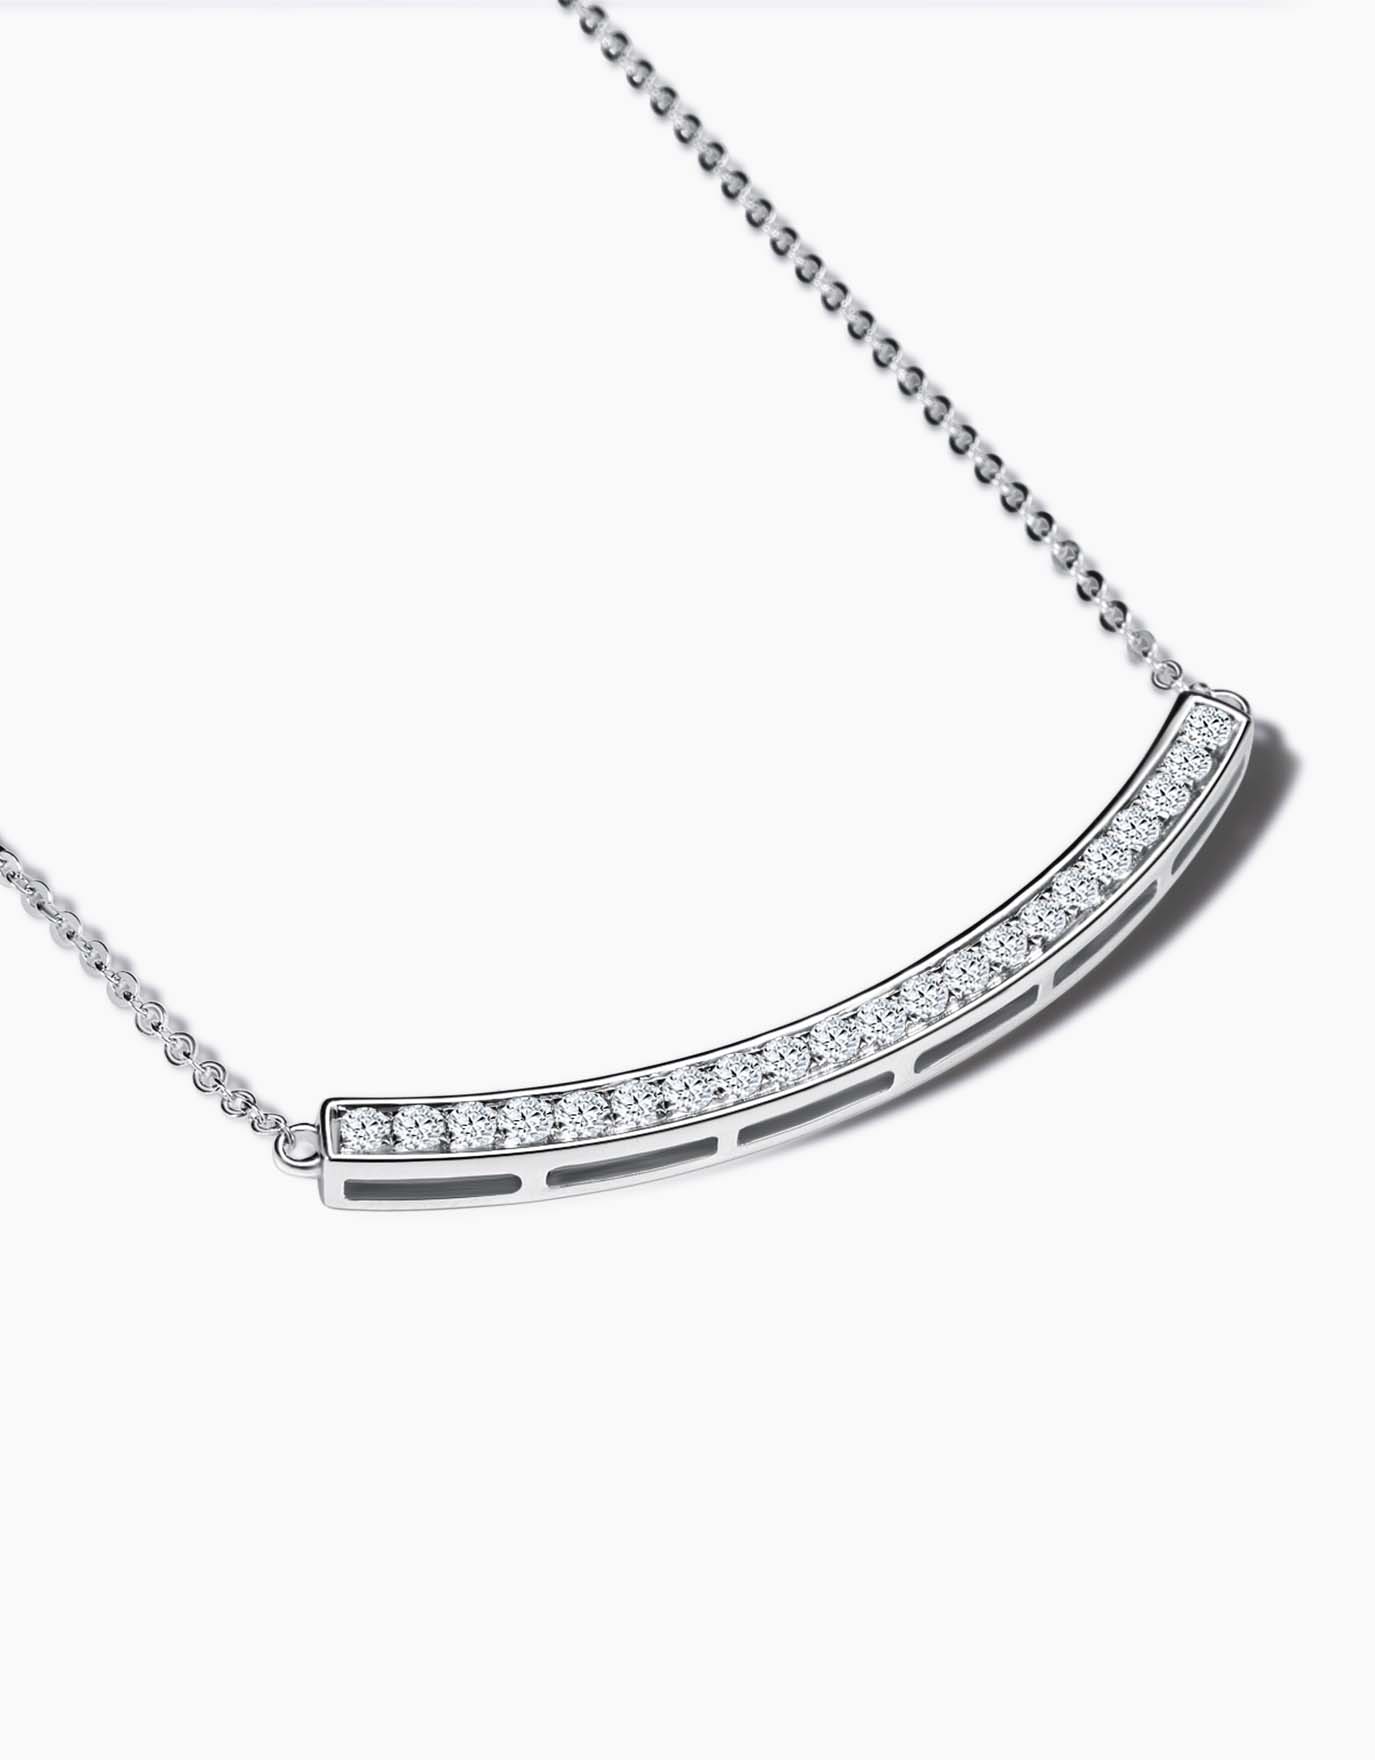 LVC Eterno Classic Curved Diamond Necklace